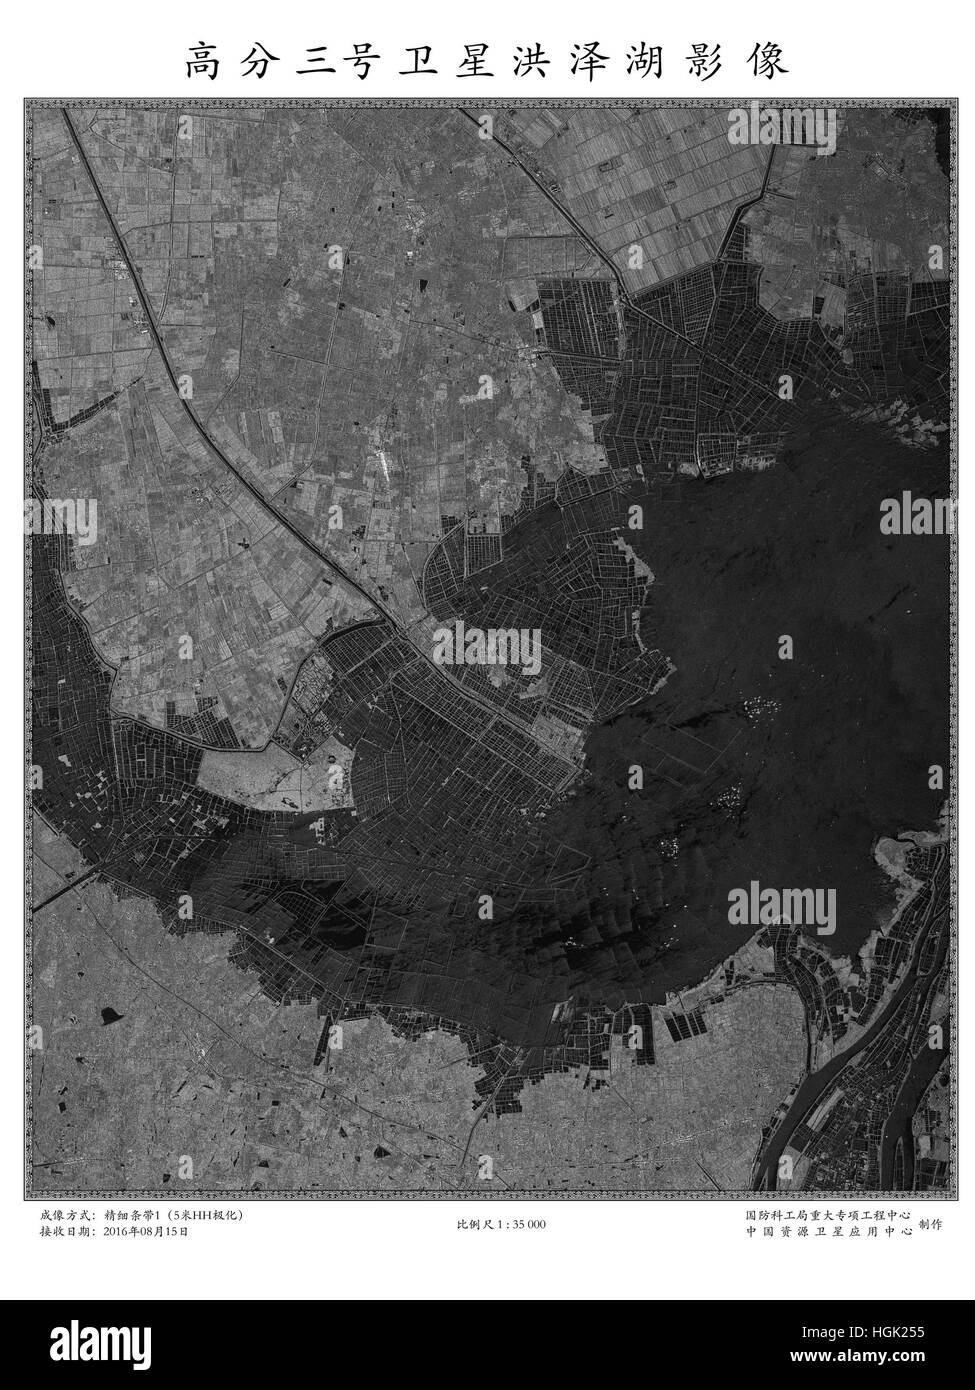 (170123) -- BEIJING, Jan. 23, 2017 (Xinhua) -- Released photo shows the image of east China's Hongze Lake, which is received from China's first high-resolution synthetic Aperture Radar (SAR) satellite on Aug. 15, 2016. China's first high-resolution Synthetic Aperture Radar (SAR) satellite has passed all its in-orbit tests and is now operational, according to the State Administration of Science, Technology and Industry for National Defense on Monday. The Gaofen-3 satellite, which is accurate to one meter in distance, was launched in August 2016. (Xinhua/State Administration of Science, Technolo Stock Photo